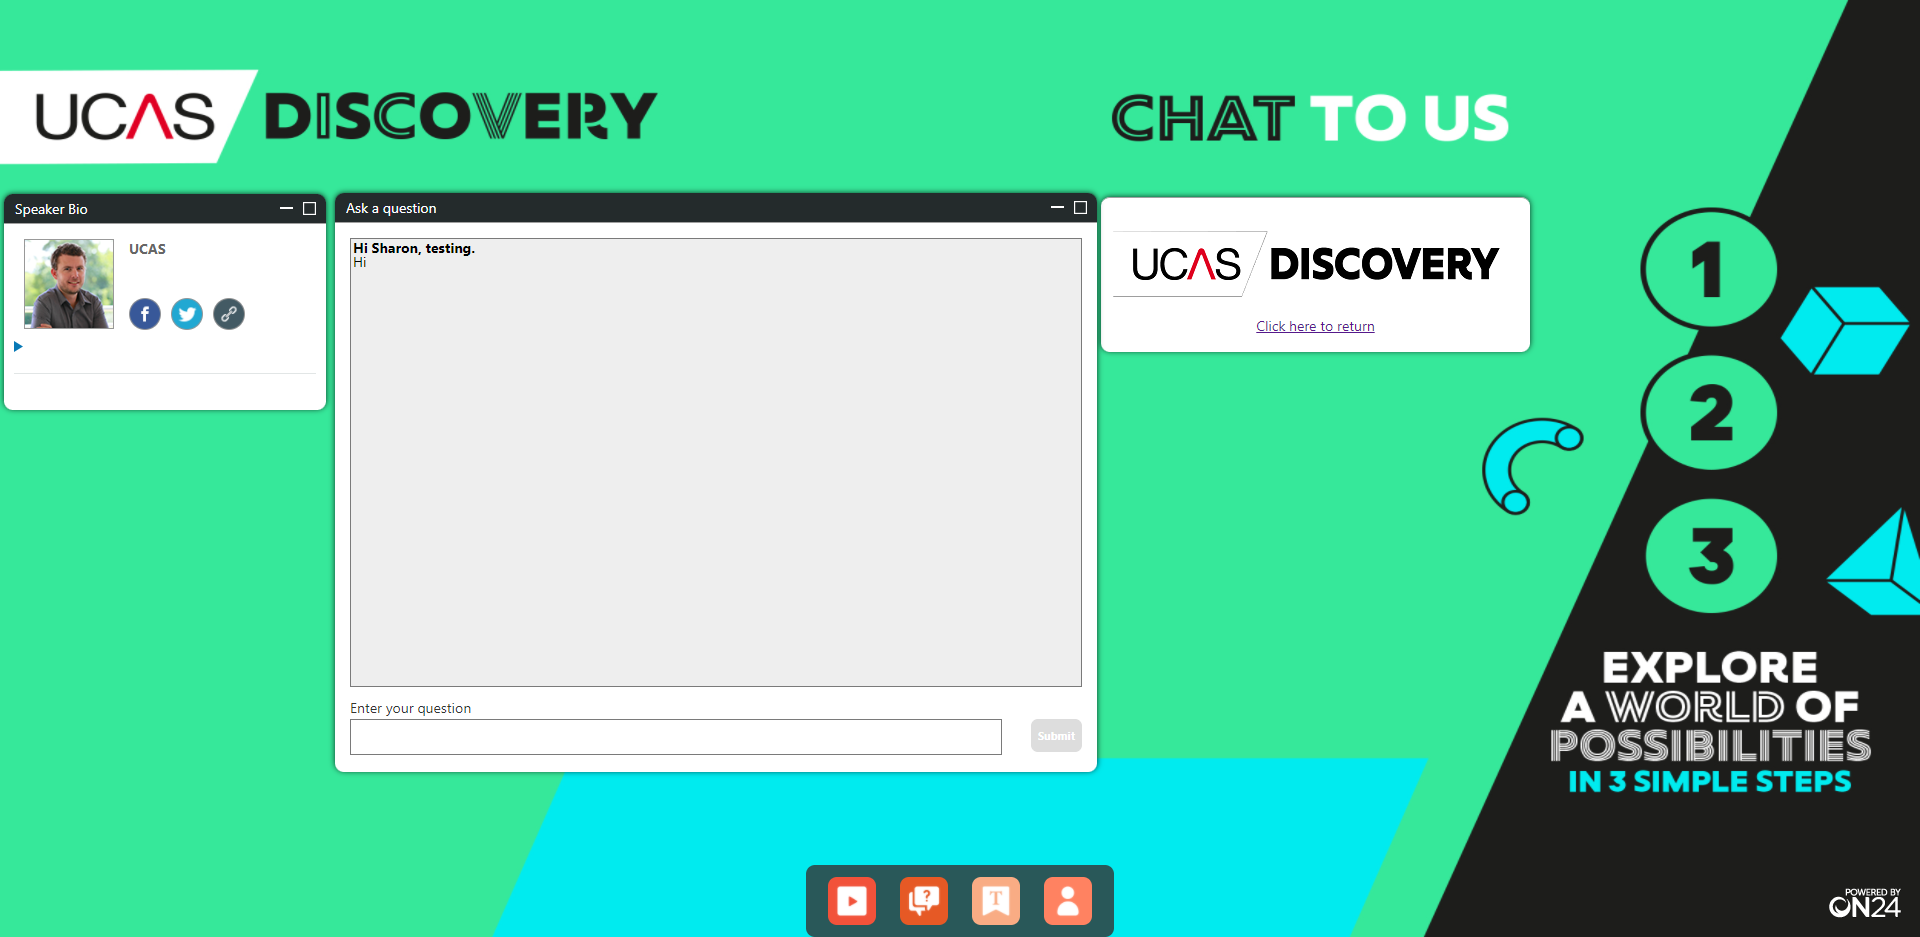 Discovery chat page